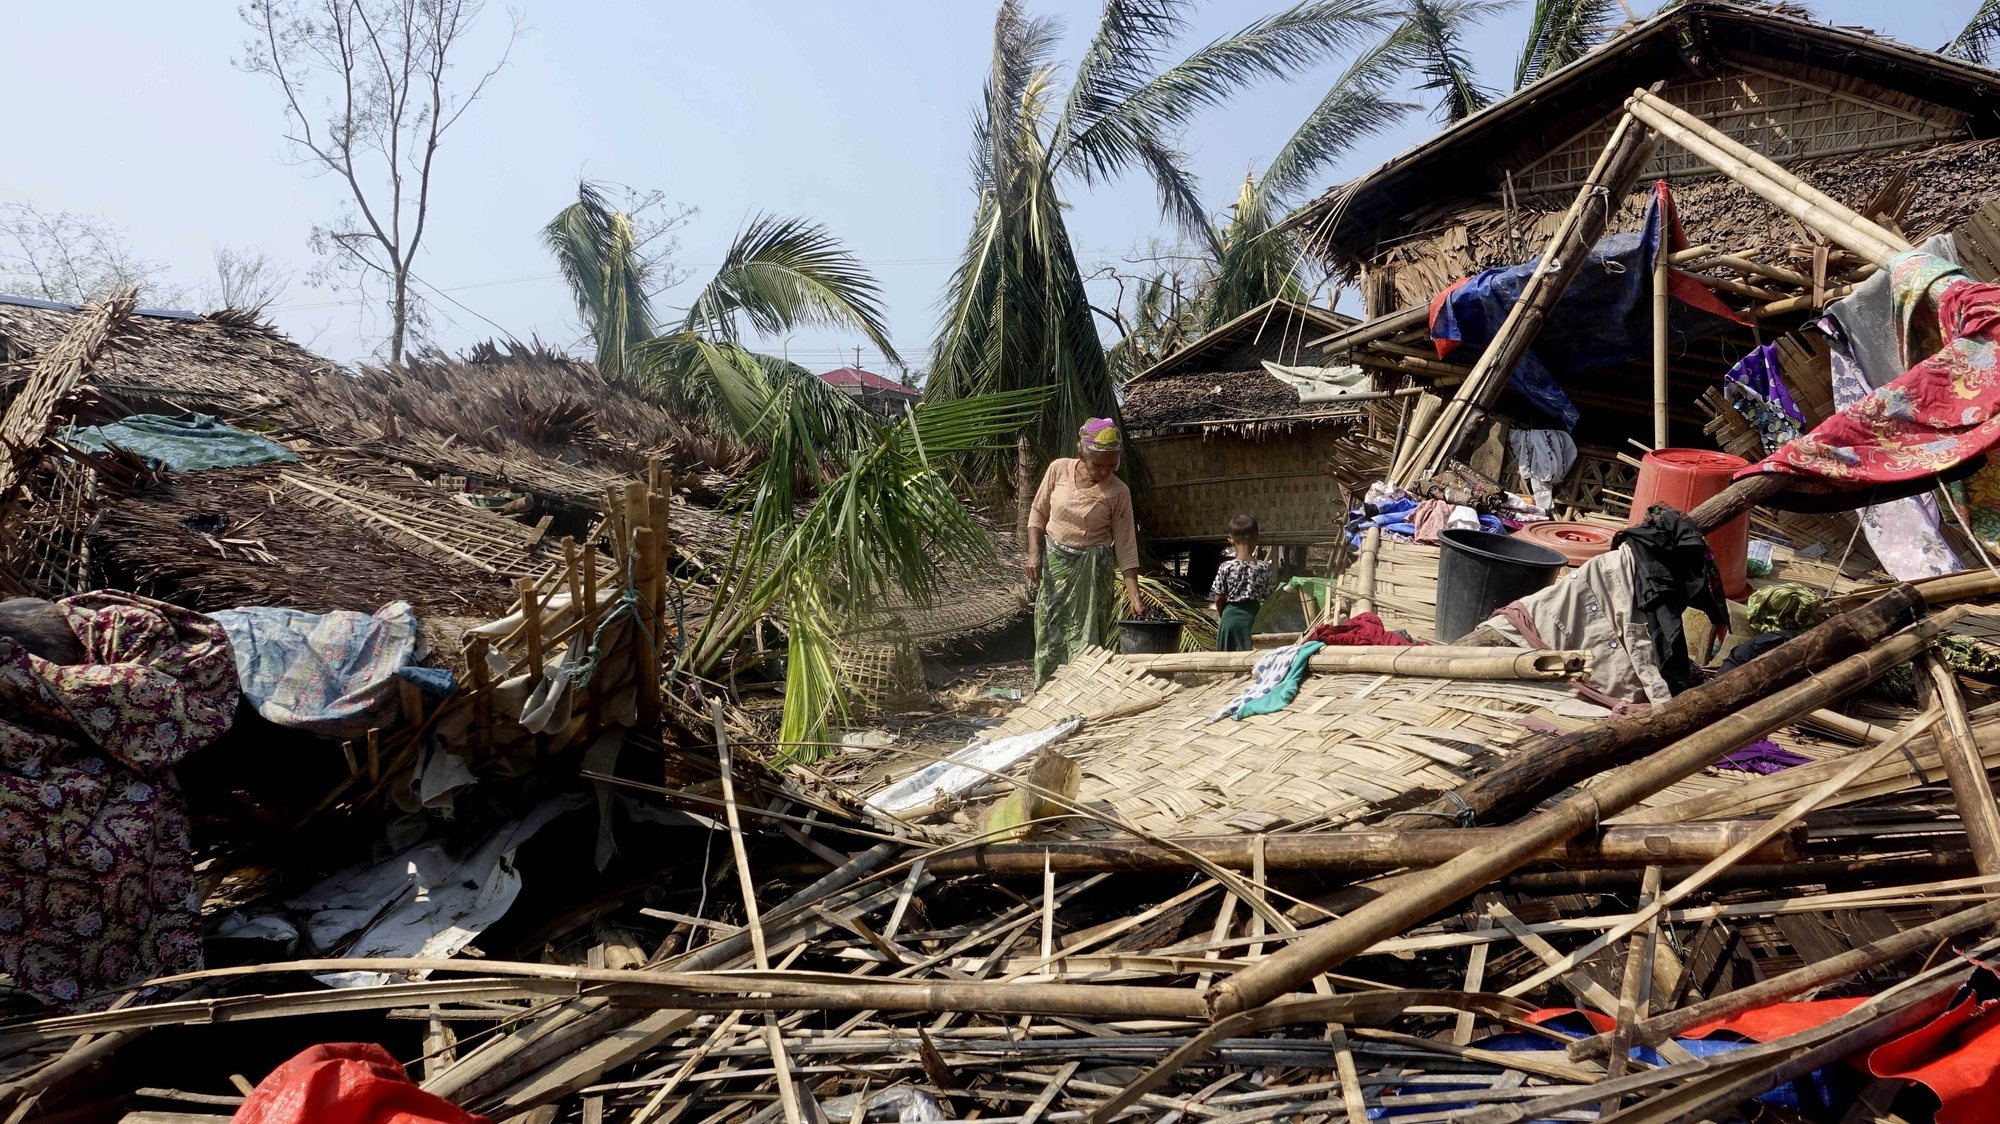 epa10633756 A Rohingya woman stands near a damaged house at the Thae Chaung Muslim internally displaced people (IDPs) camp near Sittwe, Rakhine State, Myanmar, 17 May 2023. On 14 May tropical cyclone &#039;Mocha&#039; hit the coastal regions of Myanmar and Bangladesh with maximum sustained winds of 250 kph, wreaking havoc on thousands of vulnerable communities. According to the Global Disaster Alert and Coordination System (GDACS), around three million people in Myanmar and Bangladesh were affected by the strong winds. The world&#039;s largest refugee camp in Cox&#039;s Bazar in southern Bangladesh and Rakhine State in western Myanmar were on the cyclone&#039;s route. The UN humanitarian aid office OCHA warned that torrential rains and heavy floods in cyclone-hit areas have also increased the risk of landslides ahead of the monsoon season.  EPA/STRINGER